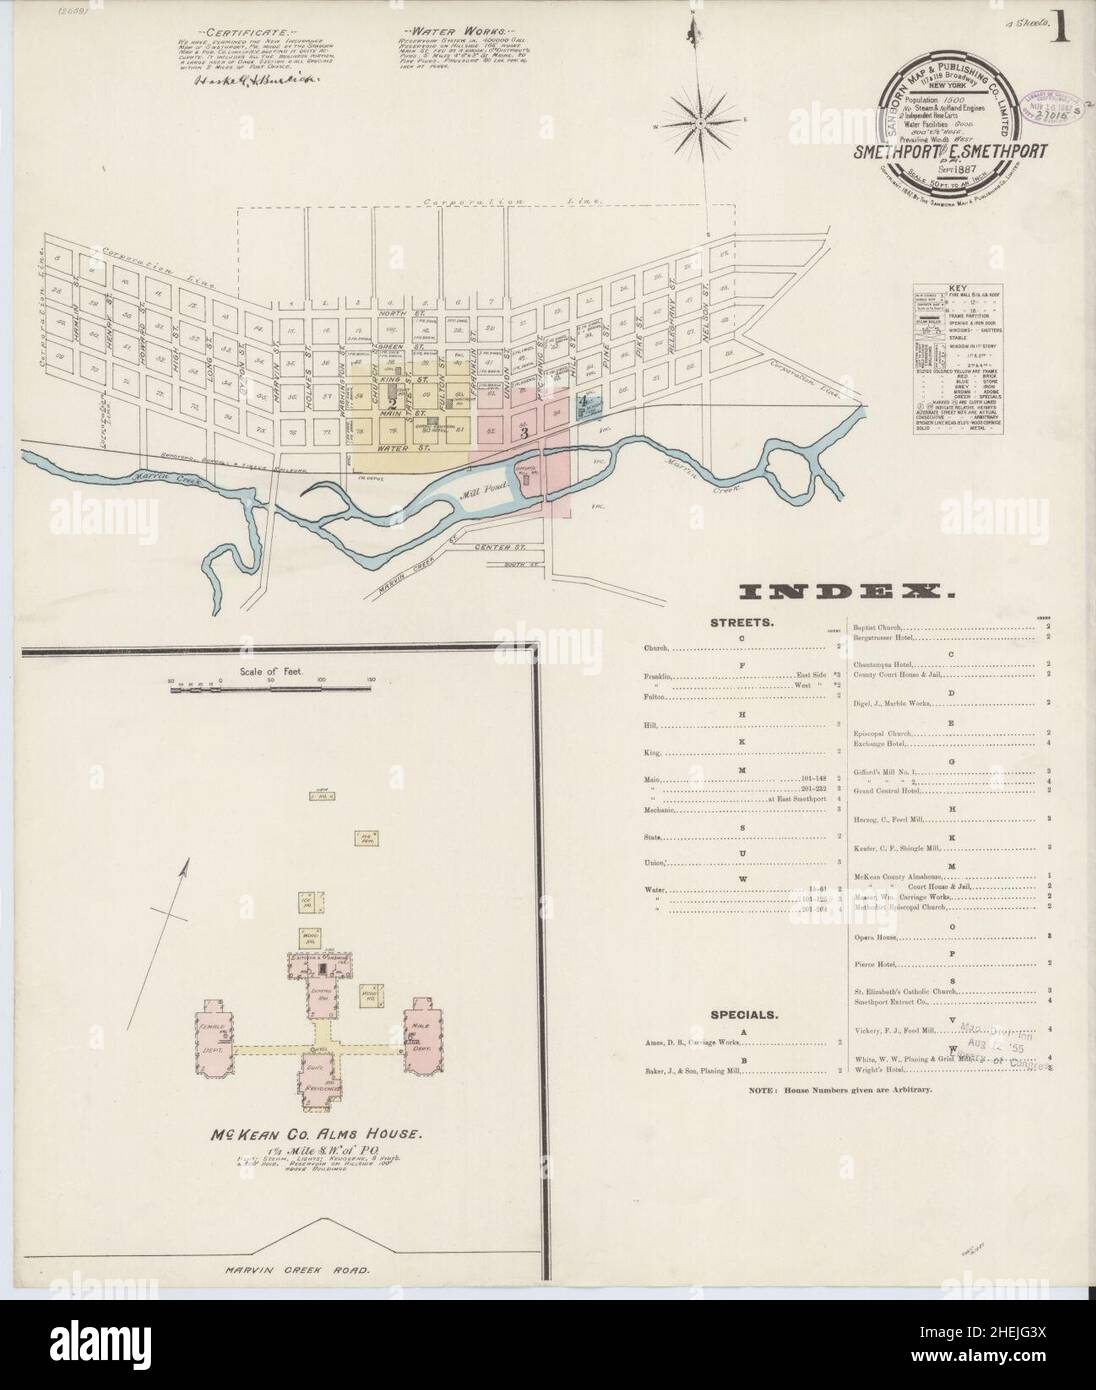 Sanborn Fire Insurance Map from Smethport, McKean County, Pennsylvania. Stock Photo